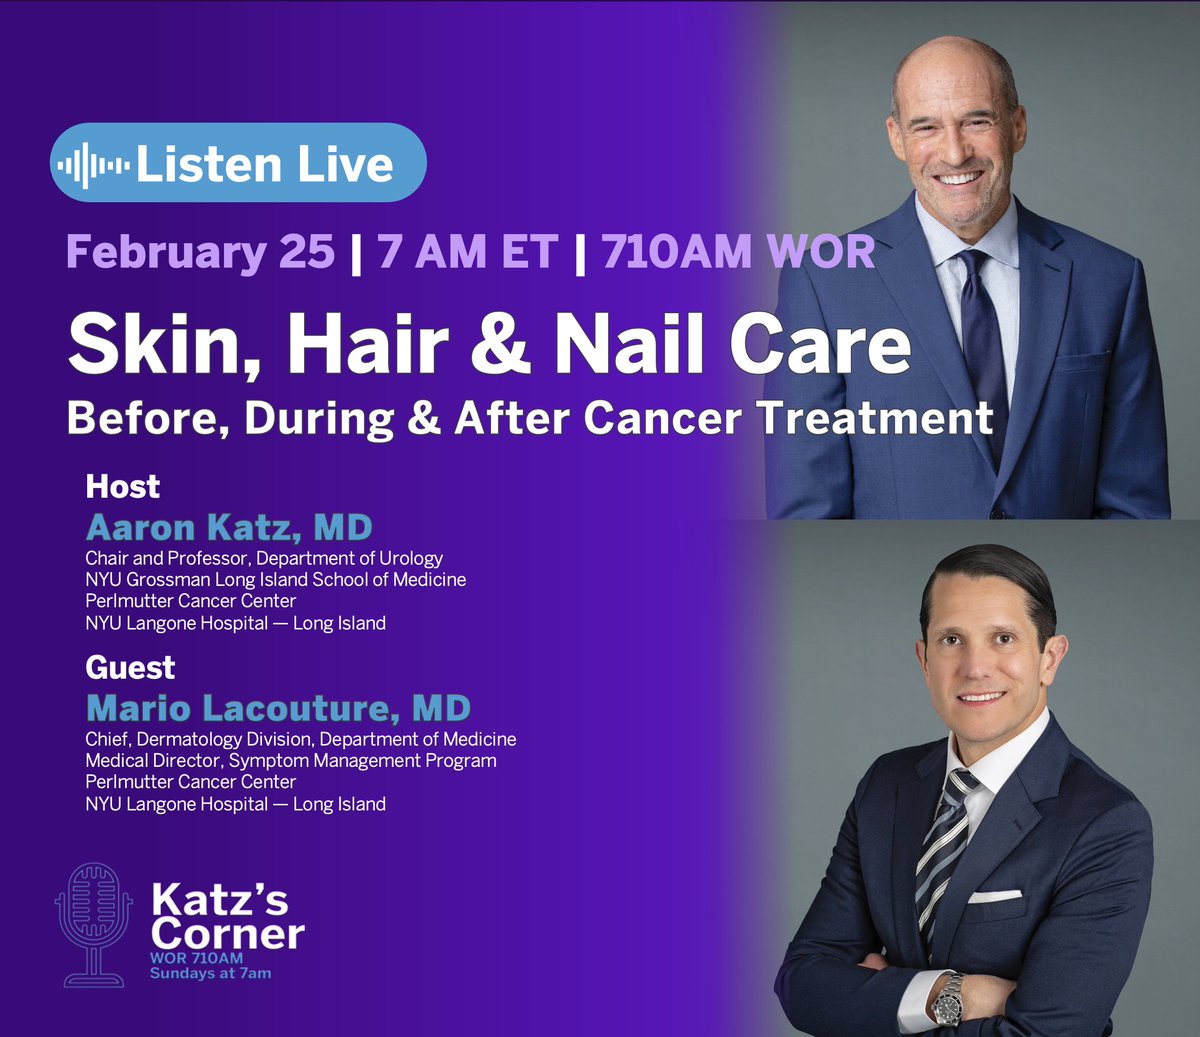 Tune in this Sunday, 2/25, to hear our Dr. Aaron Katz (@RadioDoctorKatz) and Dr. Mario Lacouture of @NYULangoneLI discuss hair, skin, and nail health in cancer care. #OncoDerm Listen live at 7 am ET on WOR 710AM | iHeartRadio: ihr.fm/3ENmtu2